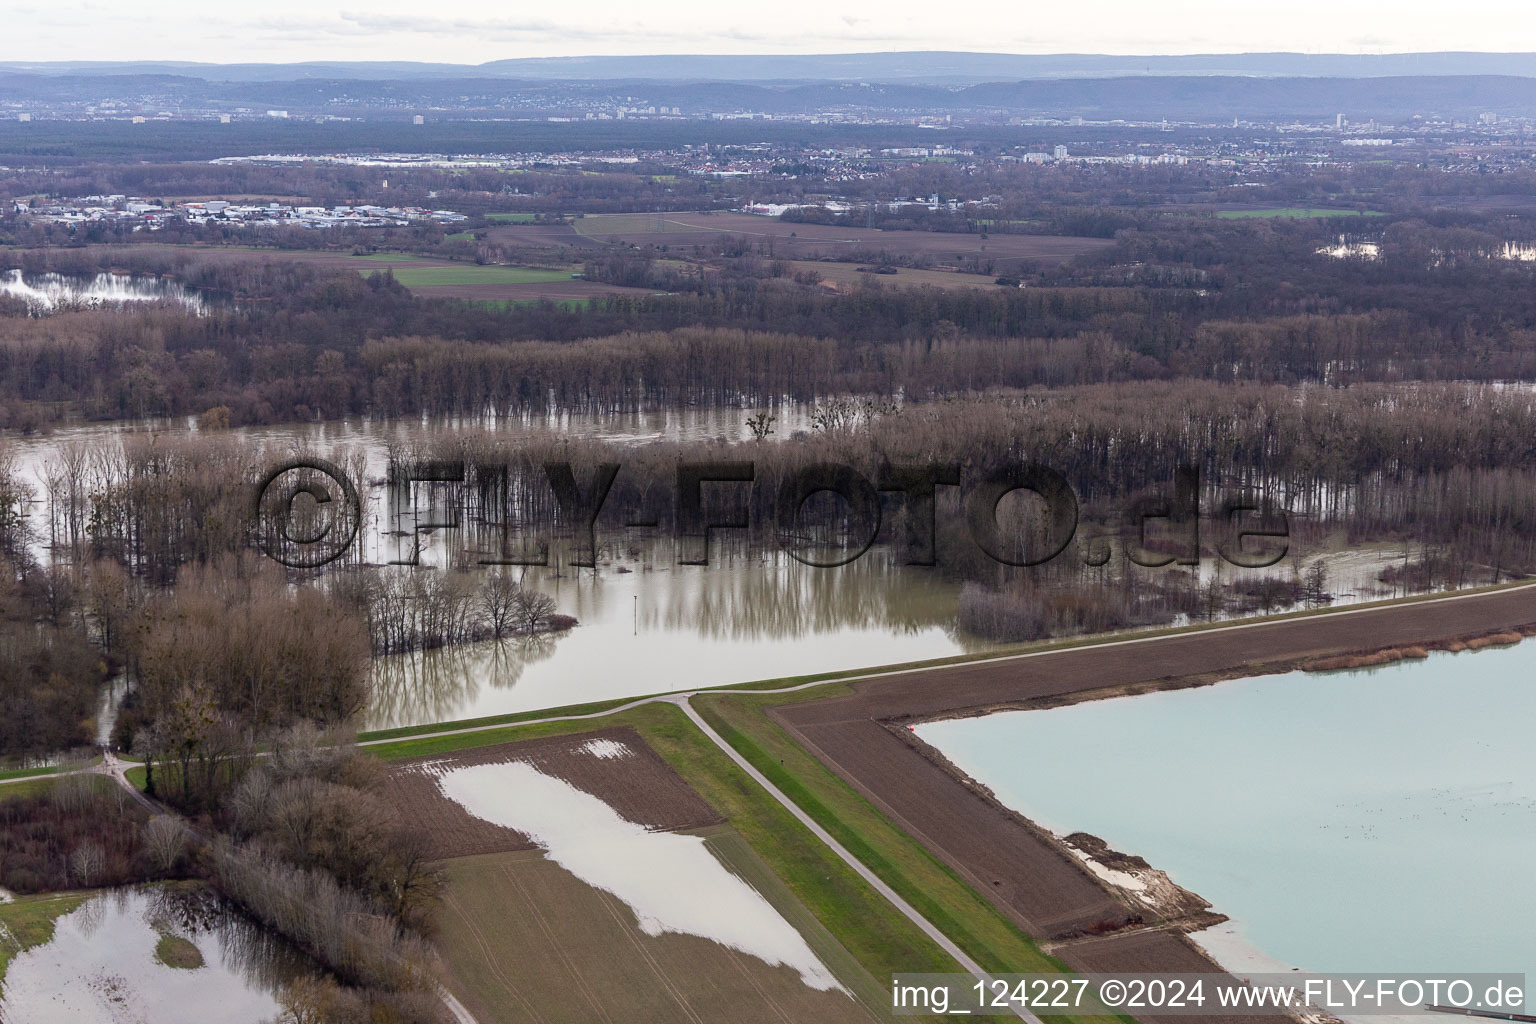 Riparian areas and flooded flood meadows of Polder Neupotz due to a river bed leading to flood levels of the Rhine river in Neupotz in the state Rhineland-Palatinate, Germany